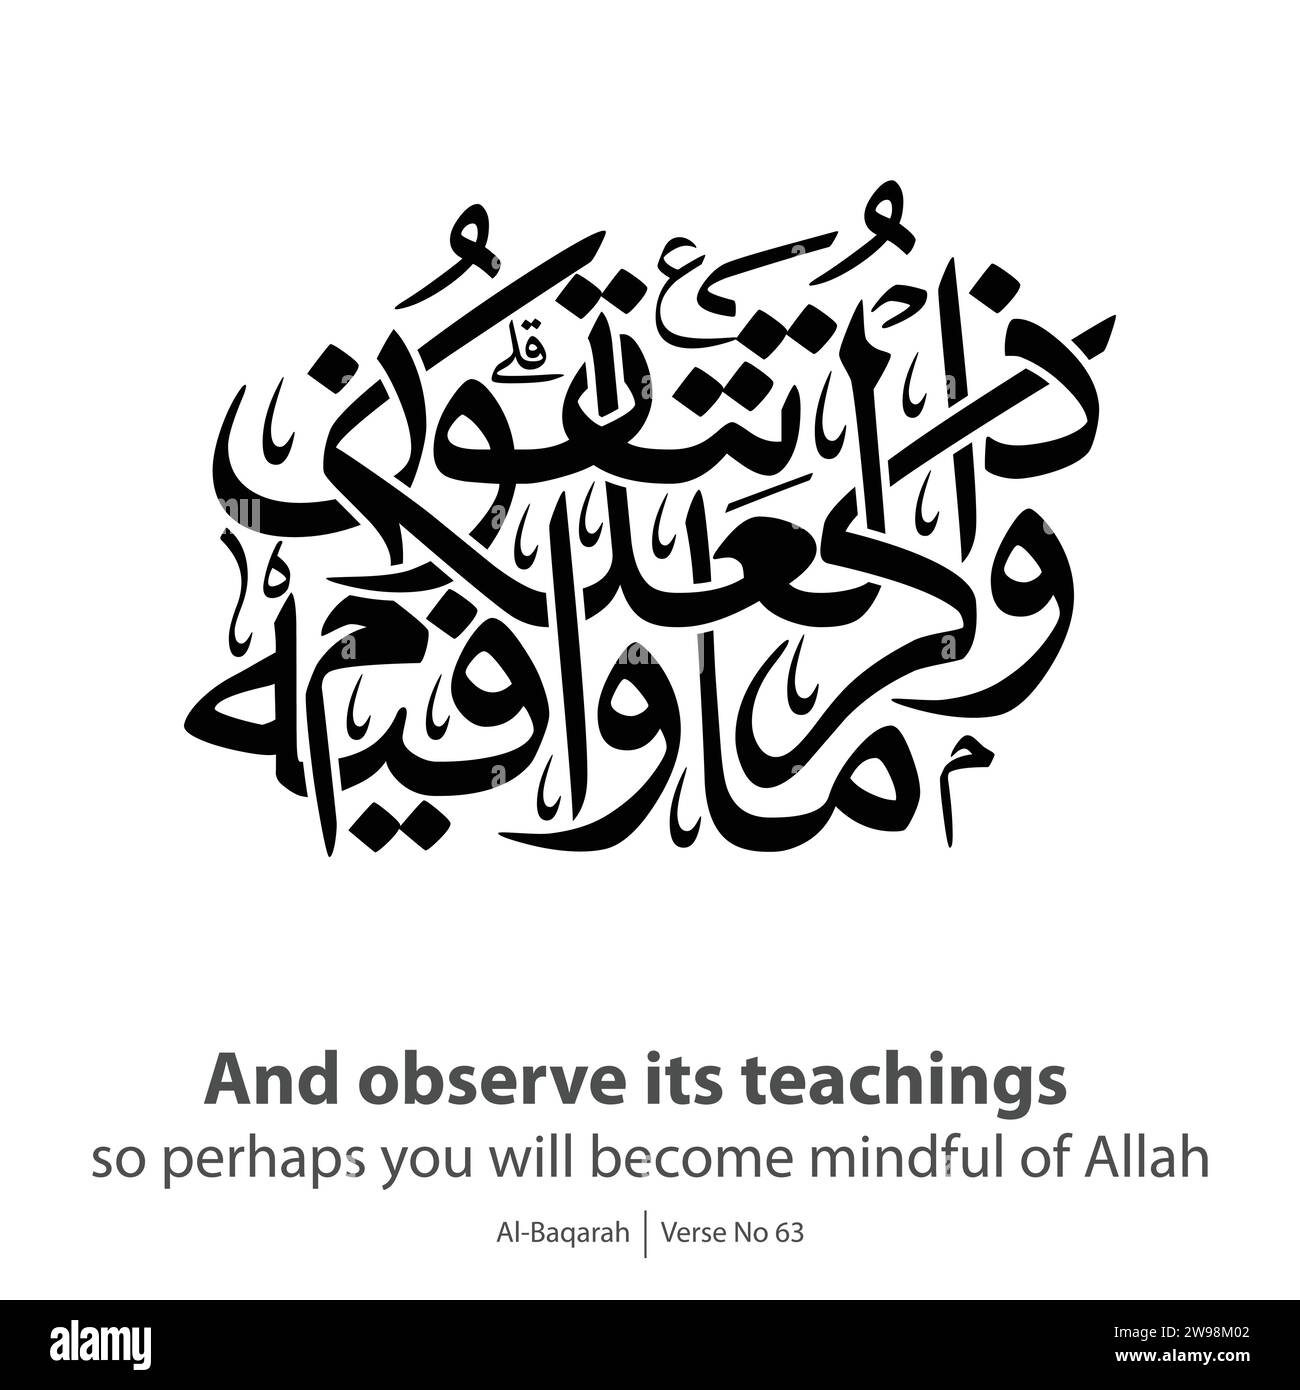 Calligraphy teachings, English Translated as, And observe its teachings so perhaps you will become mindful of Allah, Verse No 63 from Al-Baqarah Stock Vector